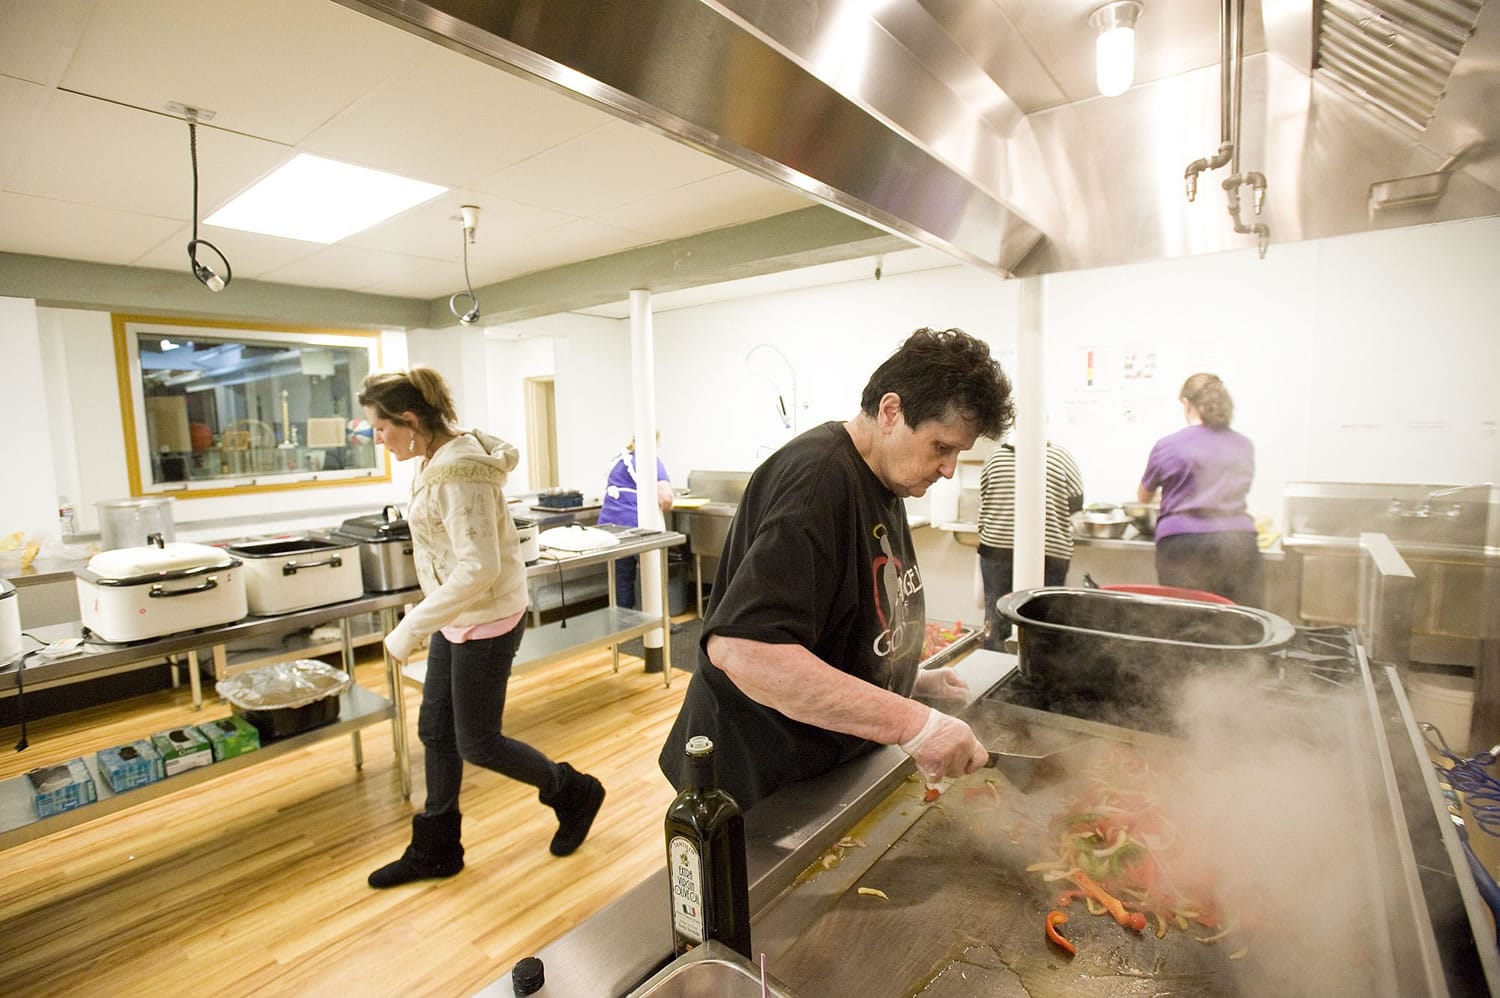 Photos by Steven Lane/The Columbian
Volunteer cook Violet Adams sautes vegetables in the brand new kitchen at The Lord's Gym in preparation for Feb. 10 hot meal service.